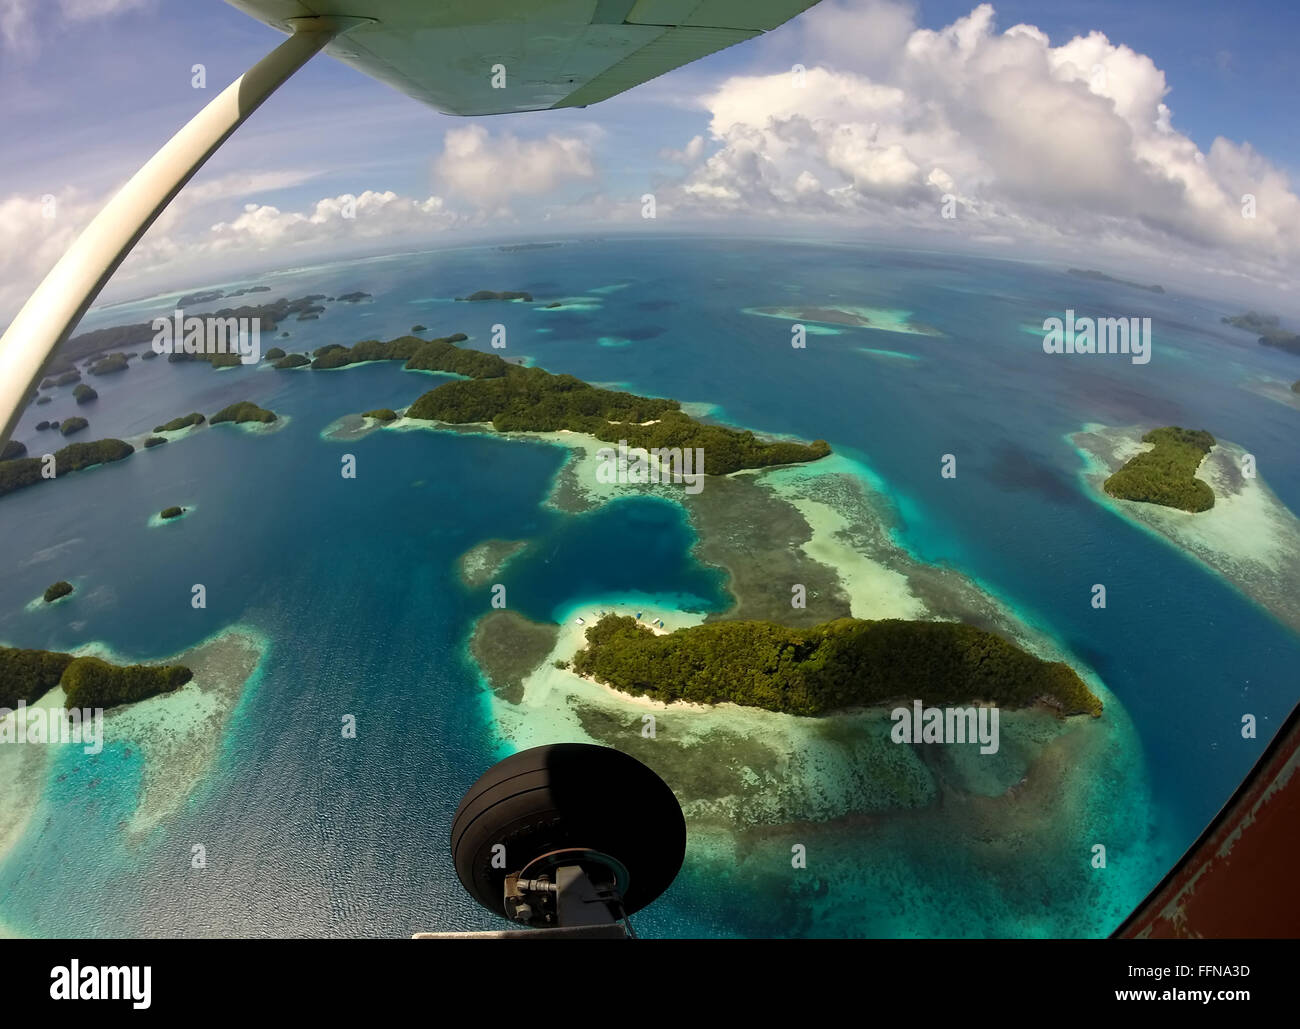 Aerial view of Palau, Micronesia, Oceania from airplane in the sky. Pacific Ocean and plane flying over sea landscape, island nature, trip on atolls Stock Photo